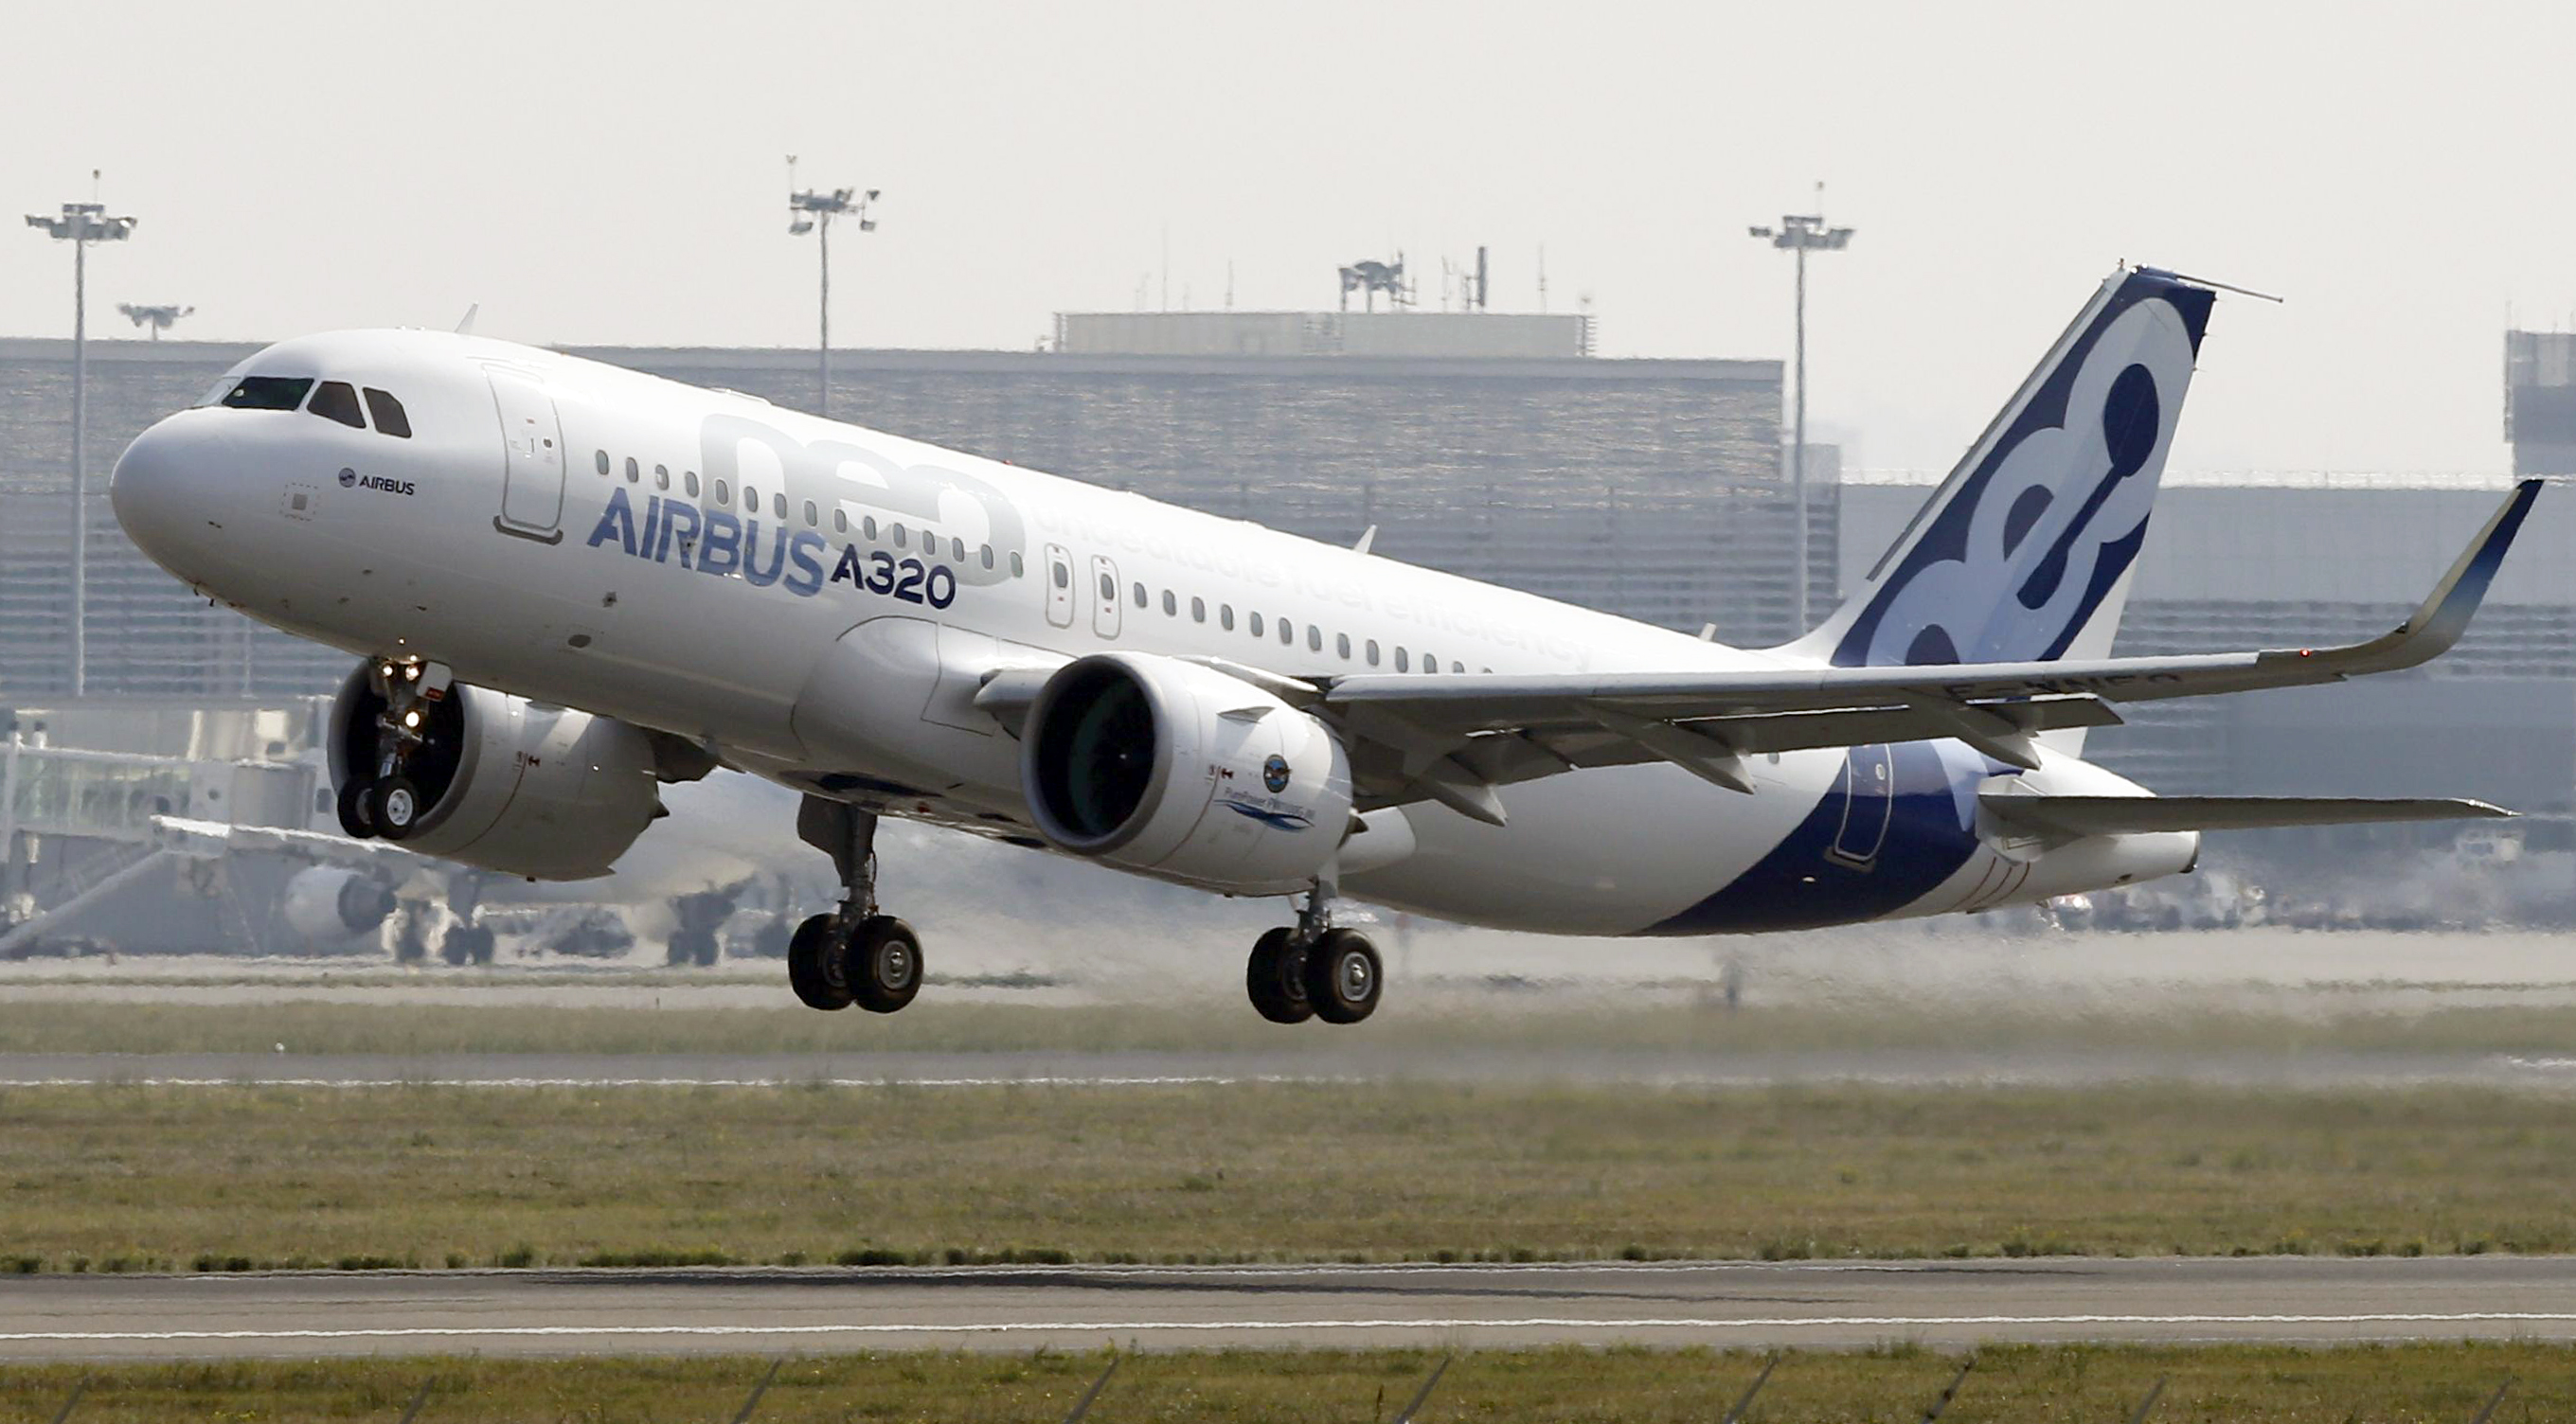 The Airbus A320neo takes off during its first flight event in Colomiers near Toulouse, southwestern France